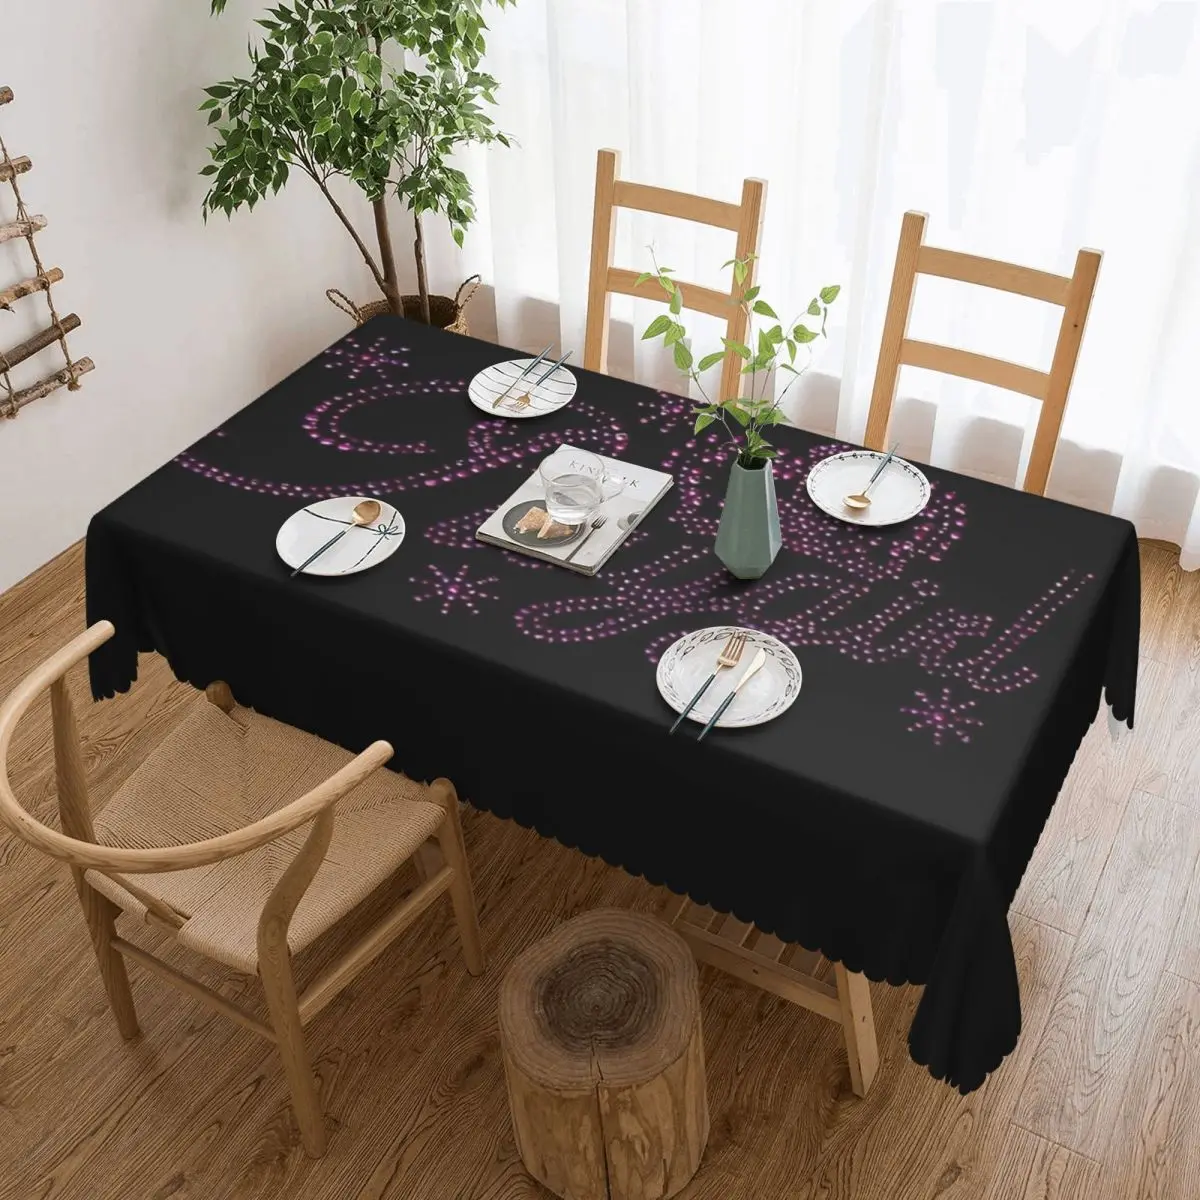 

Playgirl Pink Glam Tablecloth 54x72in Waterproof Home Decor Festive Decor